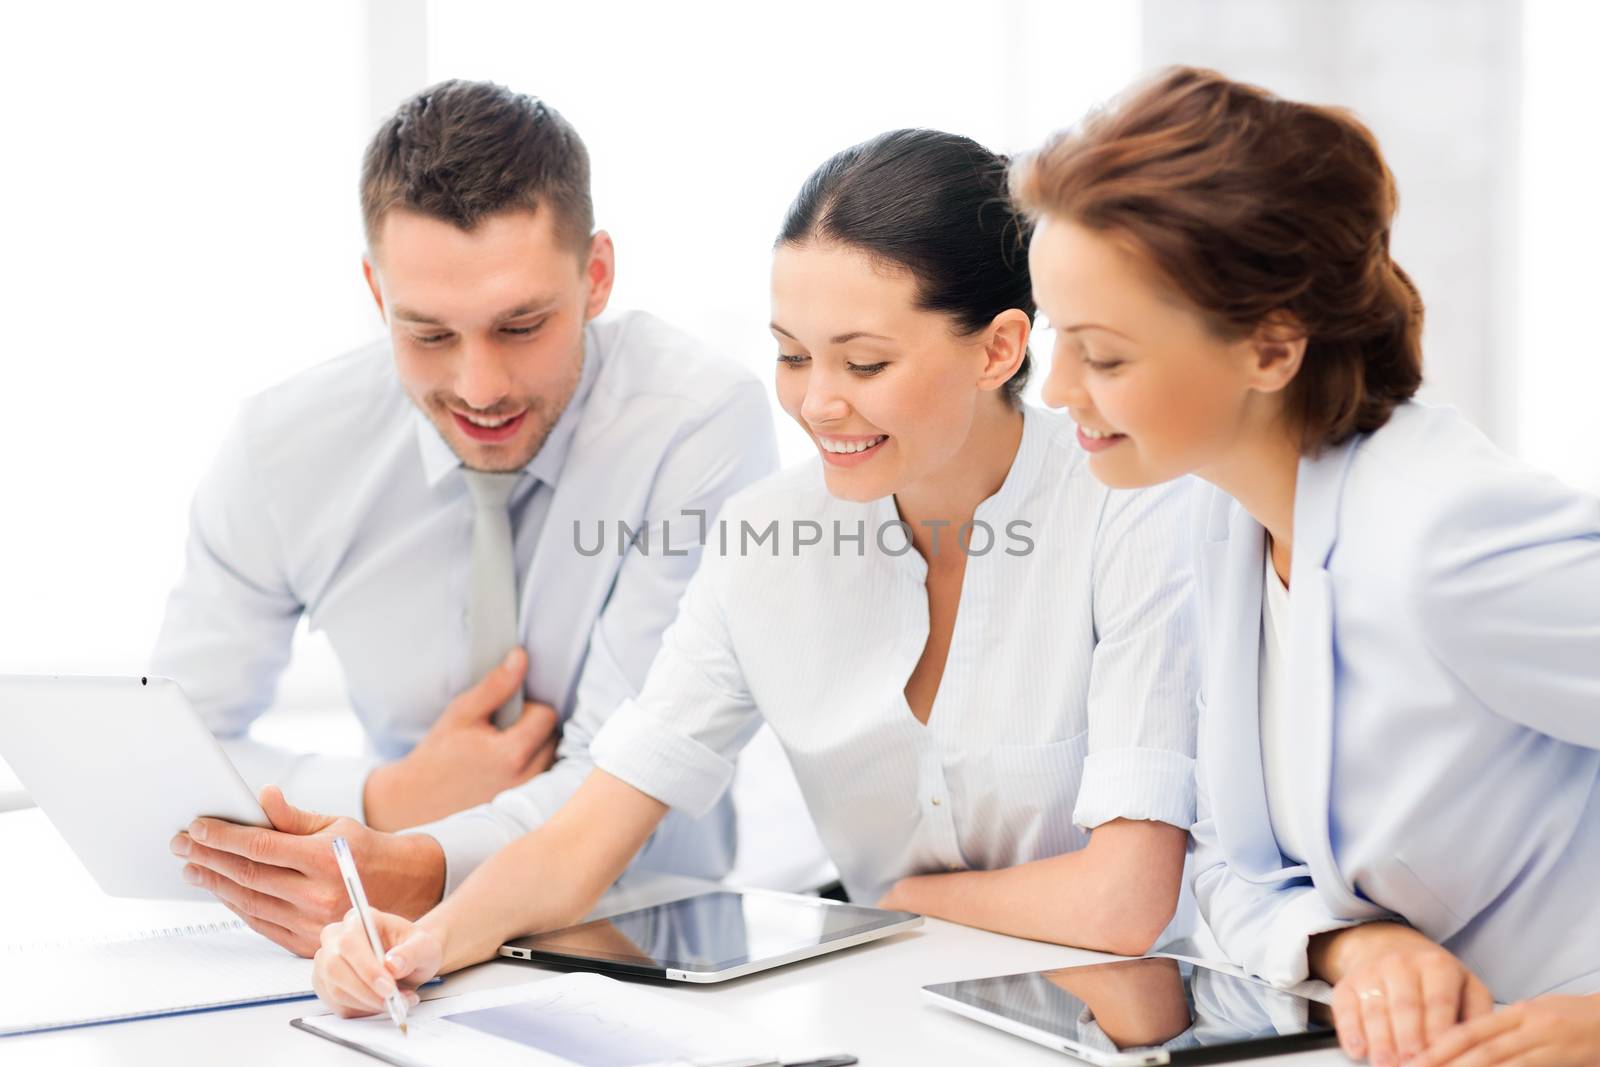 friendly business team with tablet pcs having discussion in office